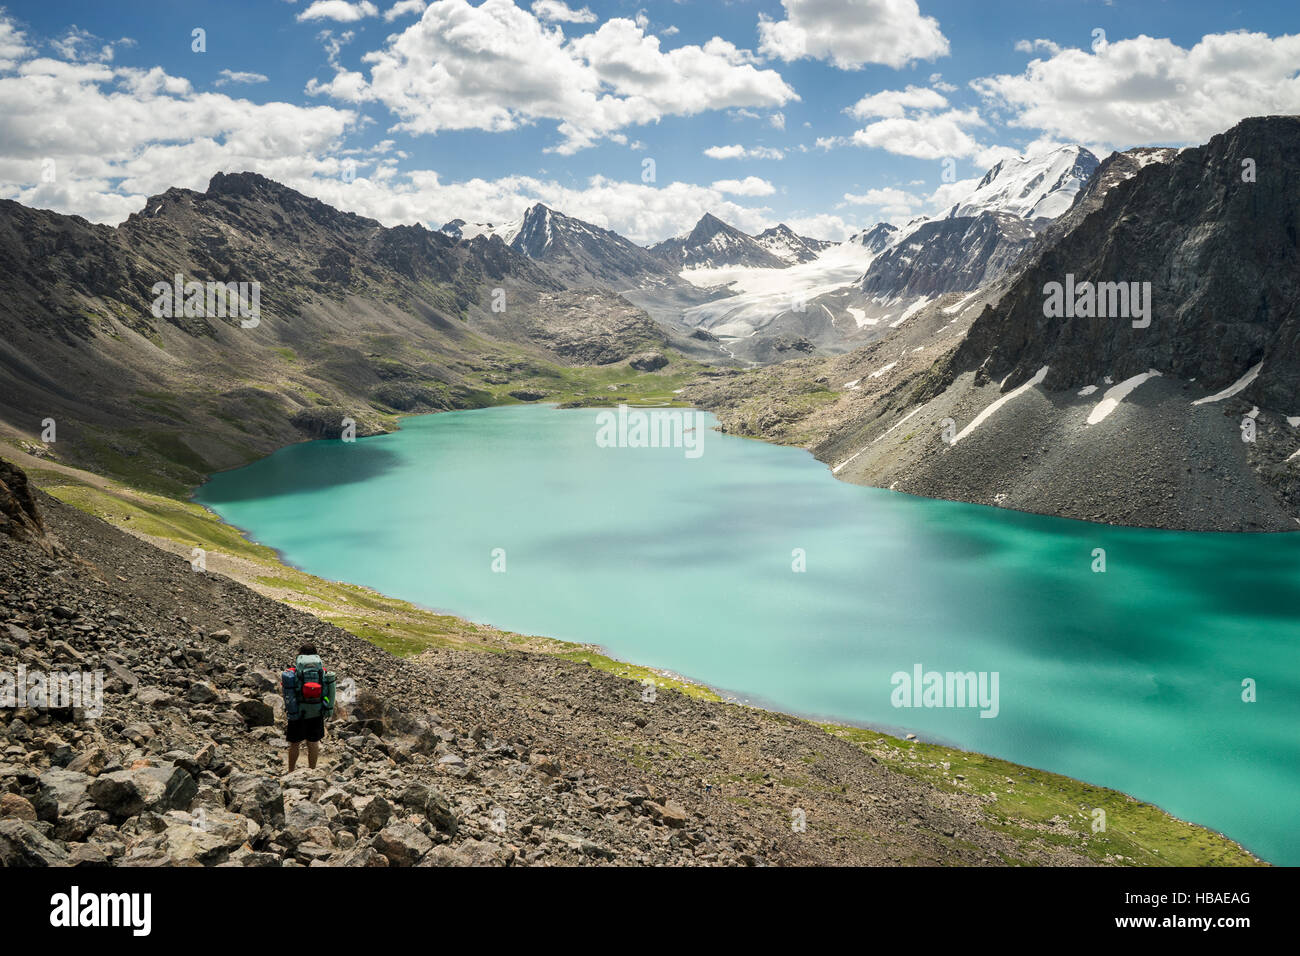 A mountaineer man stops on his trekking trail to observe the snow-capped mountains and Ala Kul Lake, Kyrgyzstan Stock Photo